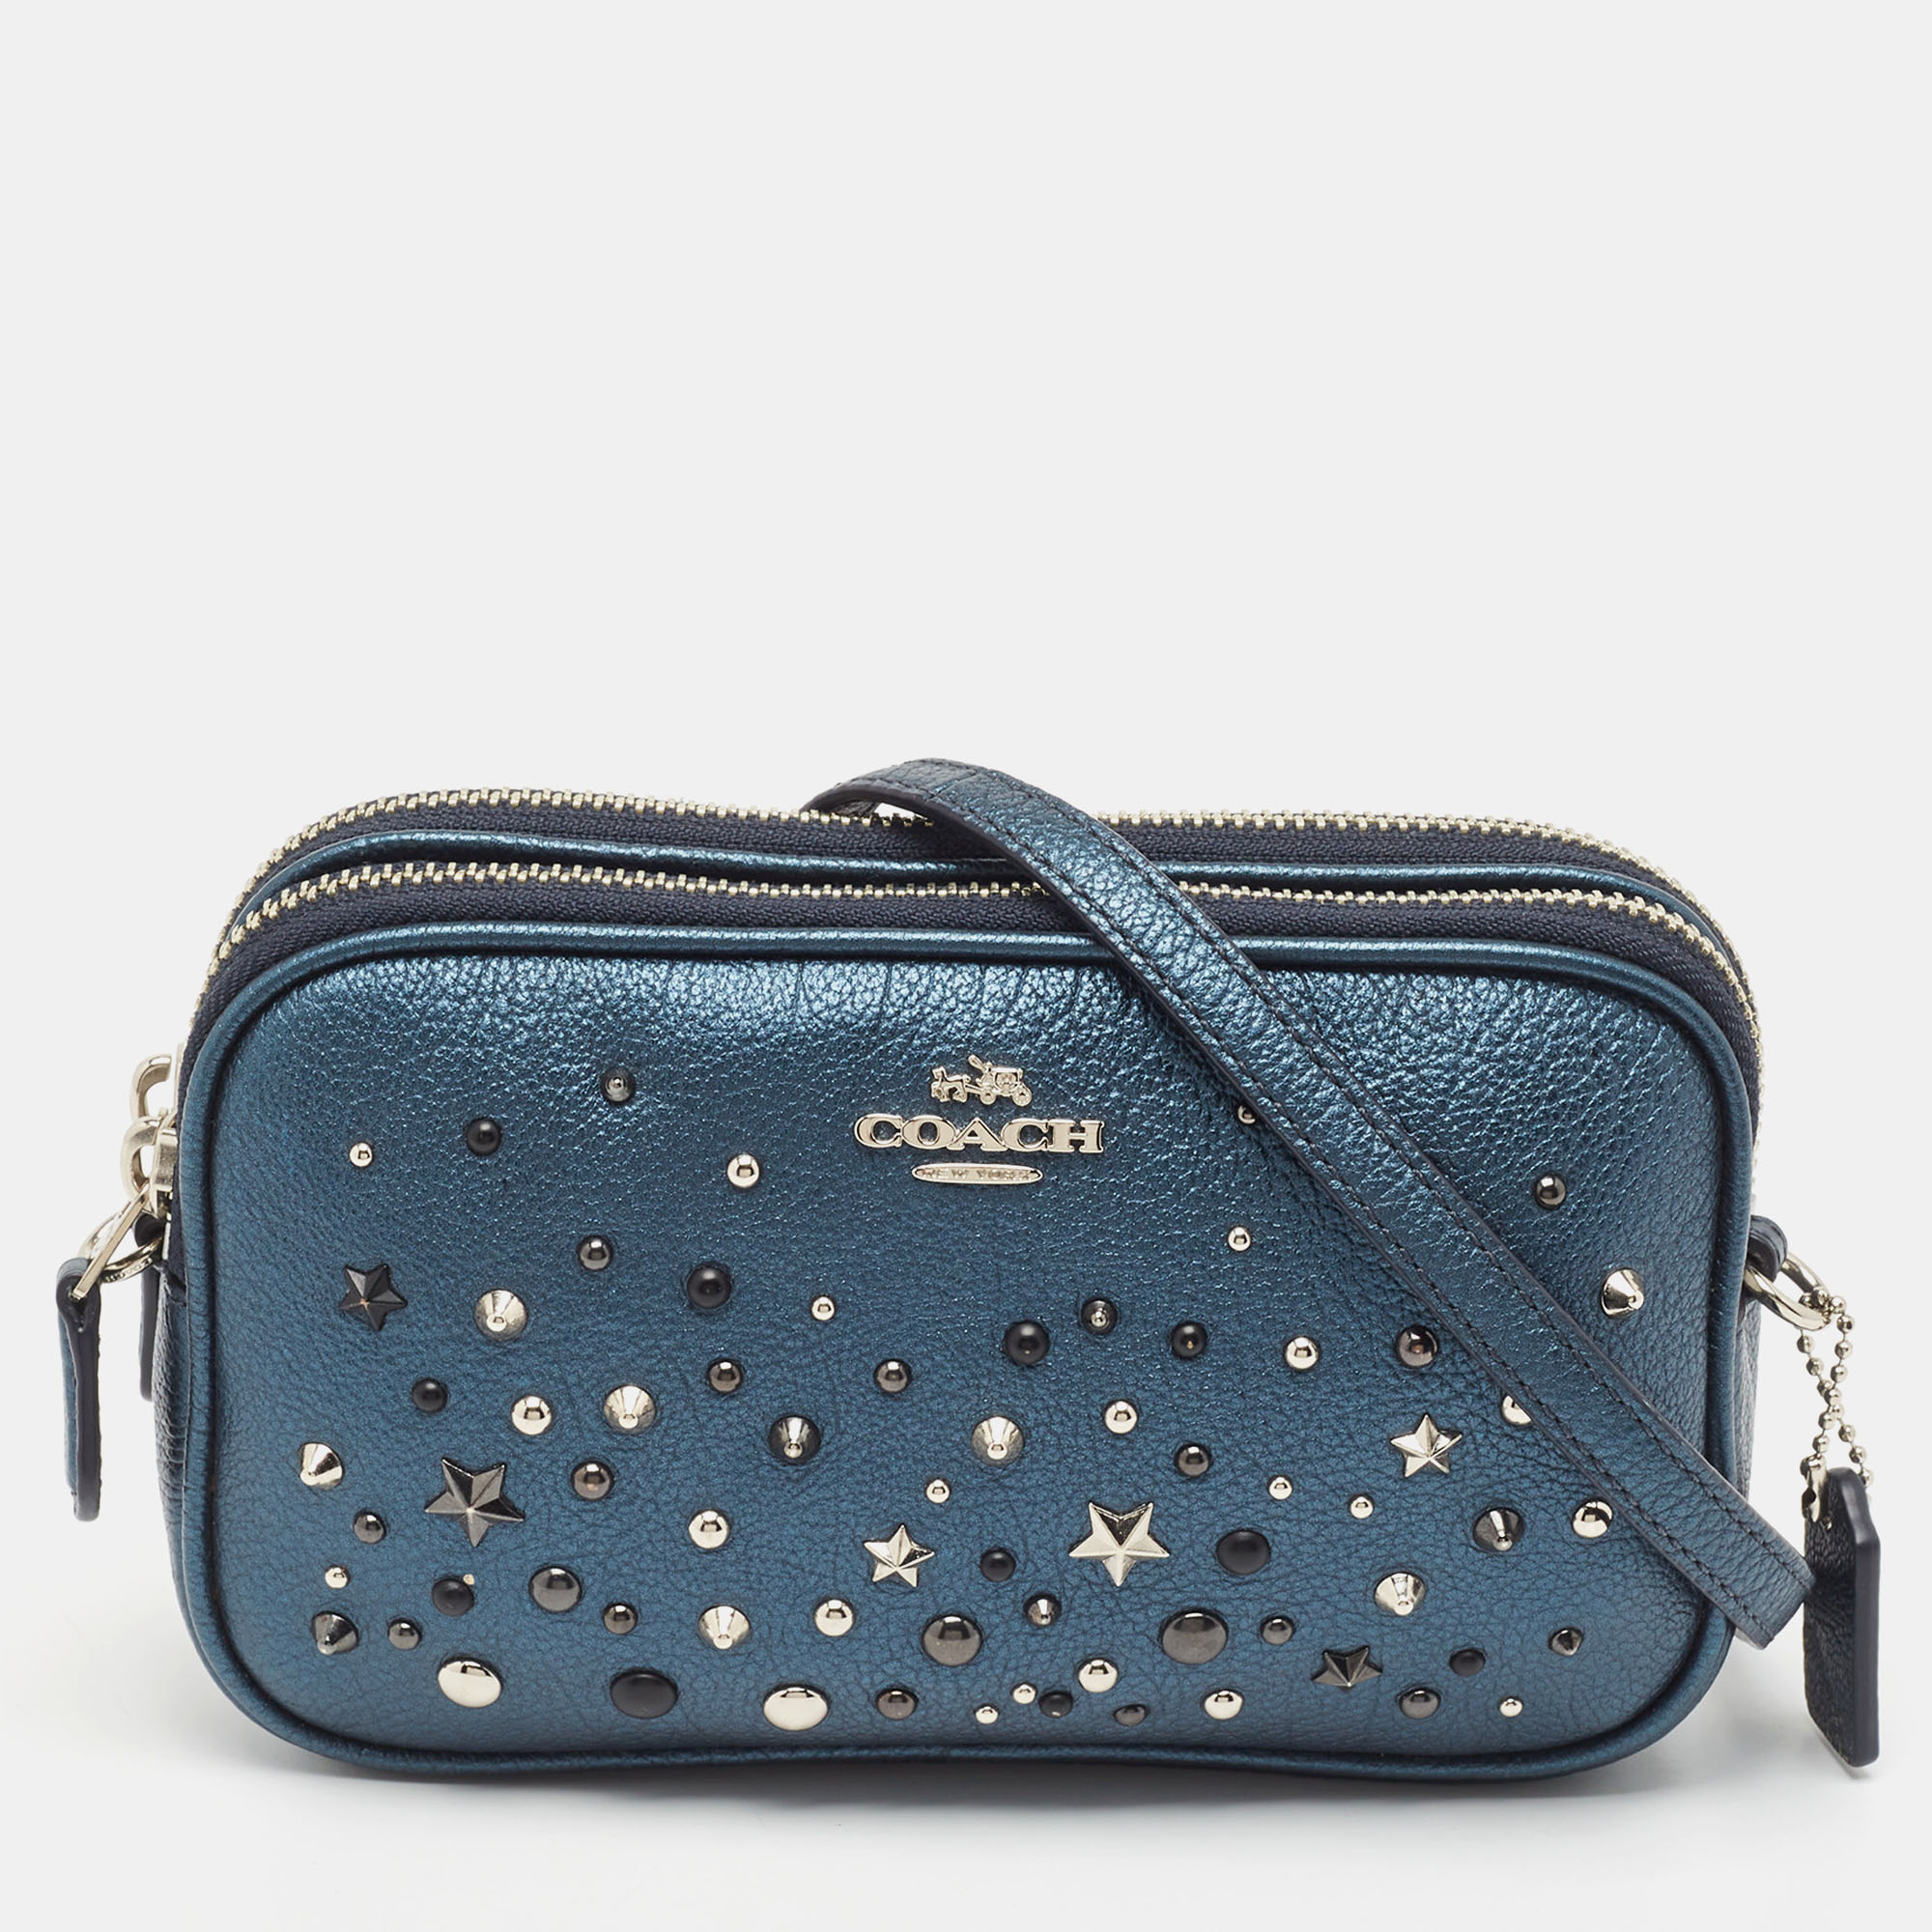 Pre-owned Coach Metallic Blue Leather Studded Double Zip Crossbody Bag